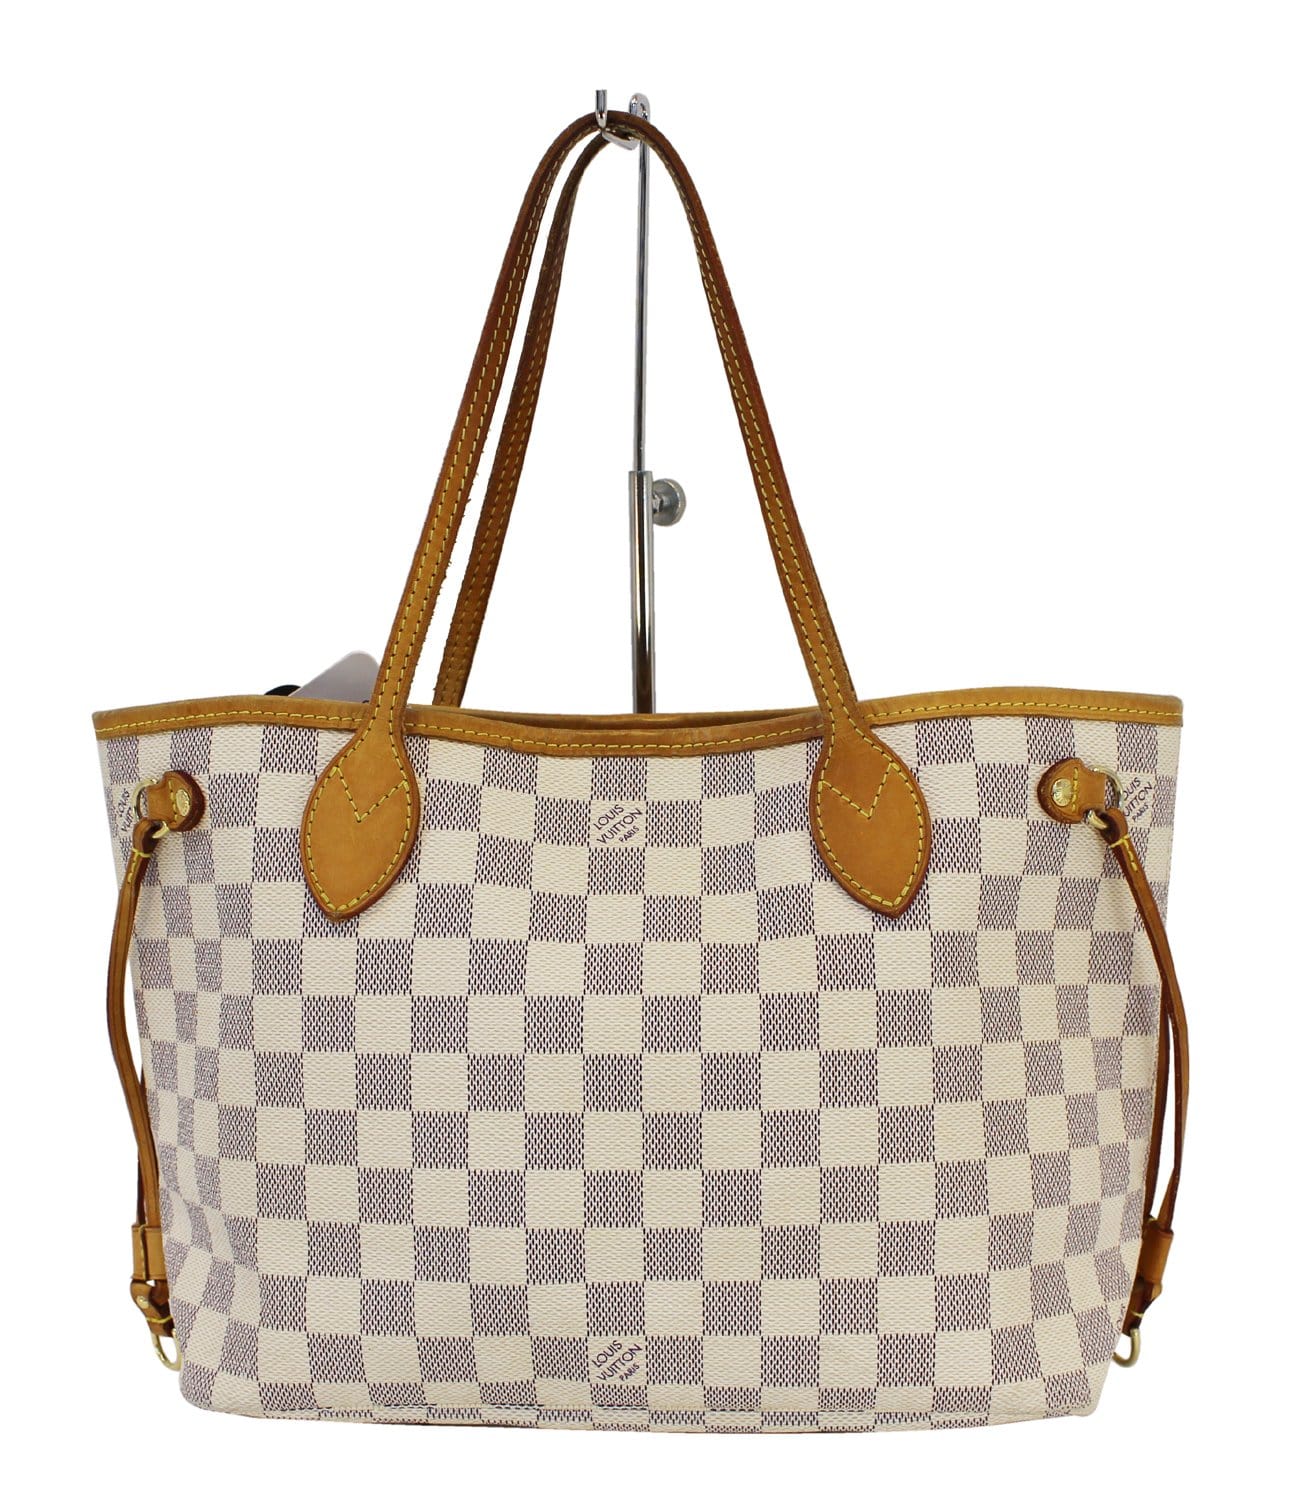 For Neverfull PM/Graceful PM/Day Tote and More